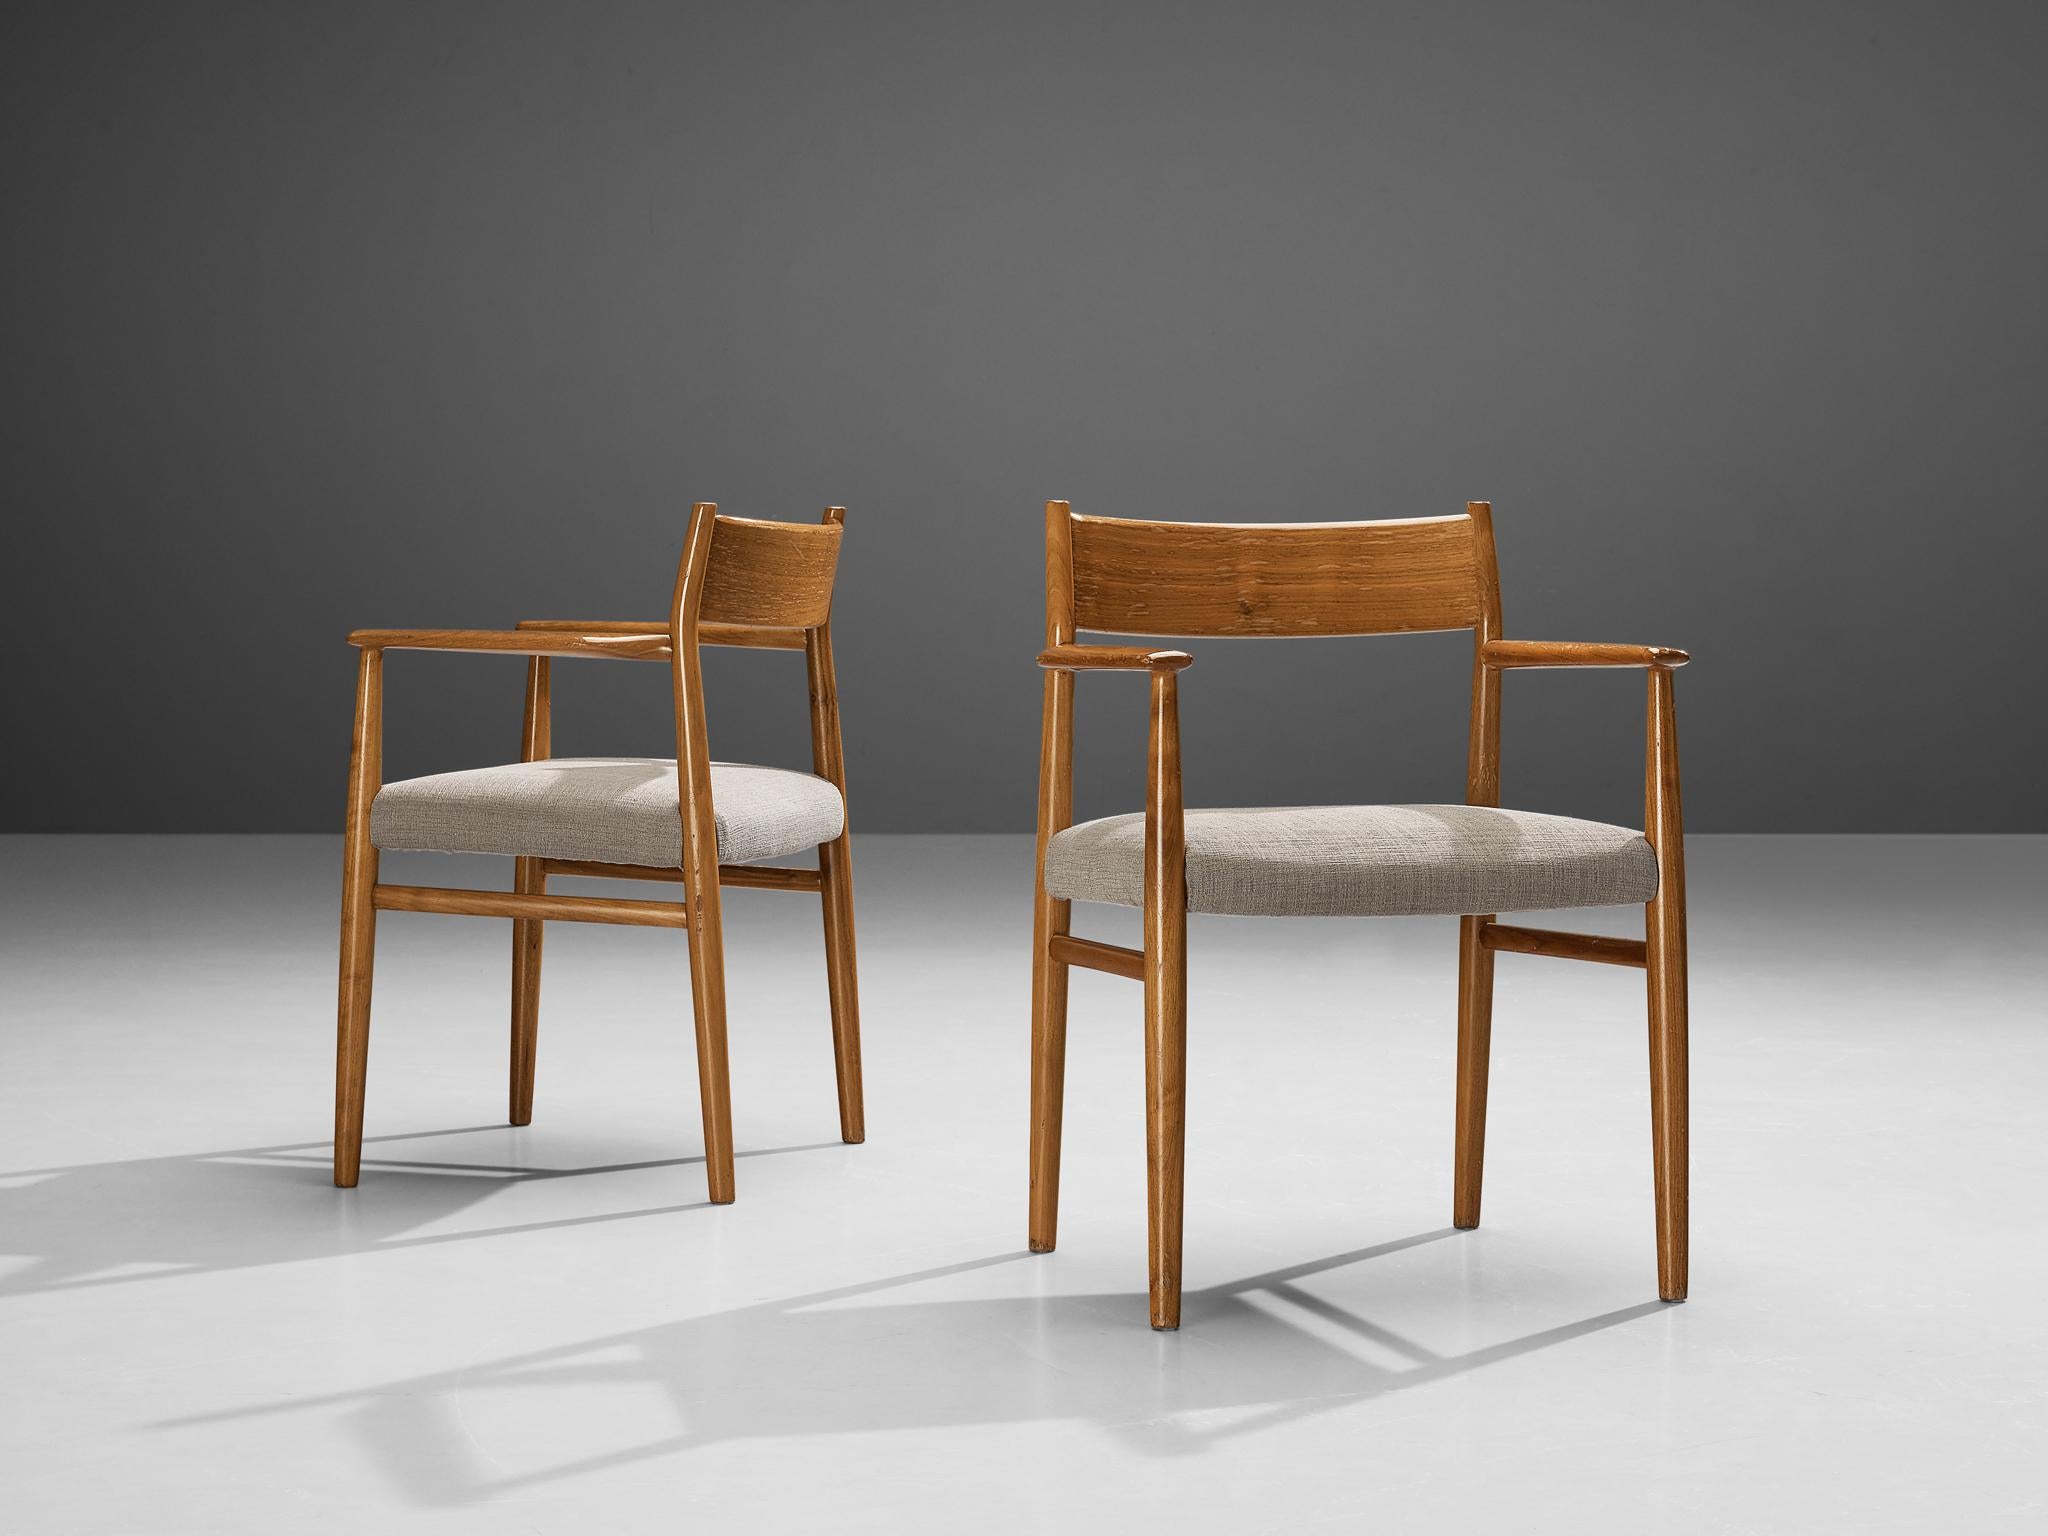 Arne Vodder for Sibast Møbler, pair of dining chairs model '418', walnut, fabric, Denmark, 1960s

This model has a characteristic, sculptural frame executed in warm walnut. The slightly tapered legs with round finishes create an overall sturdy